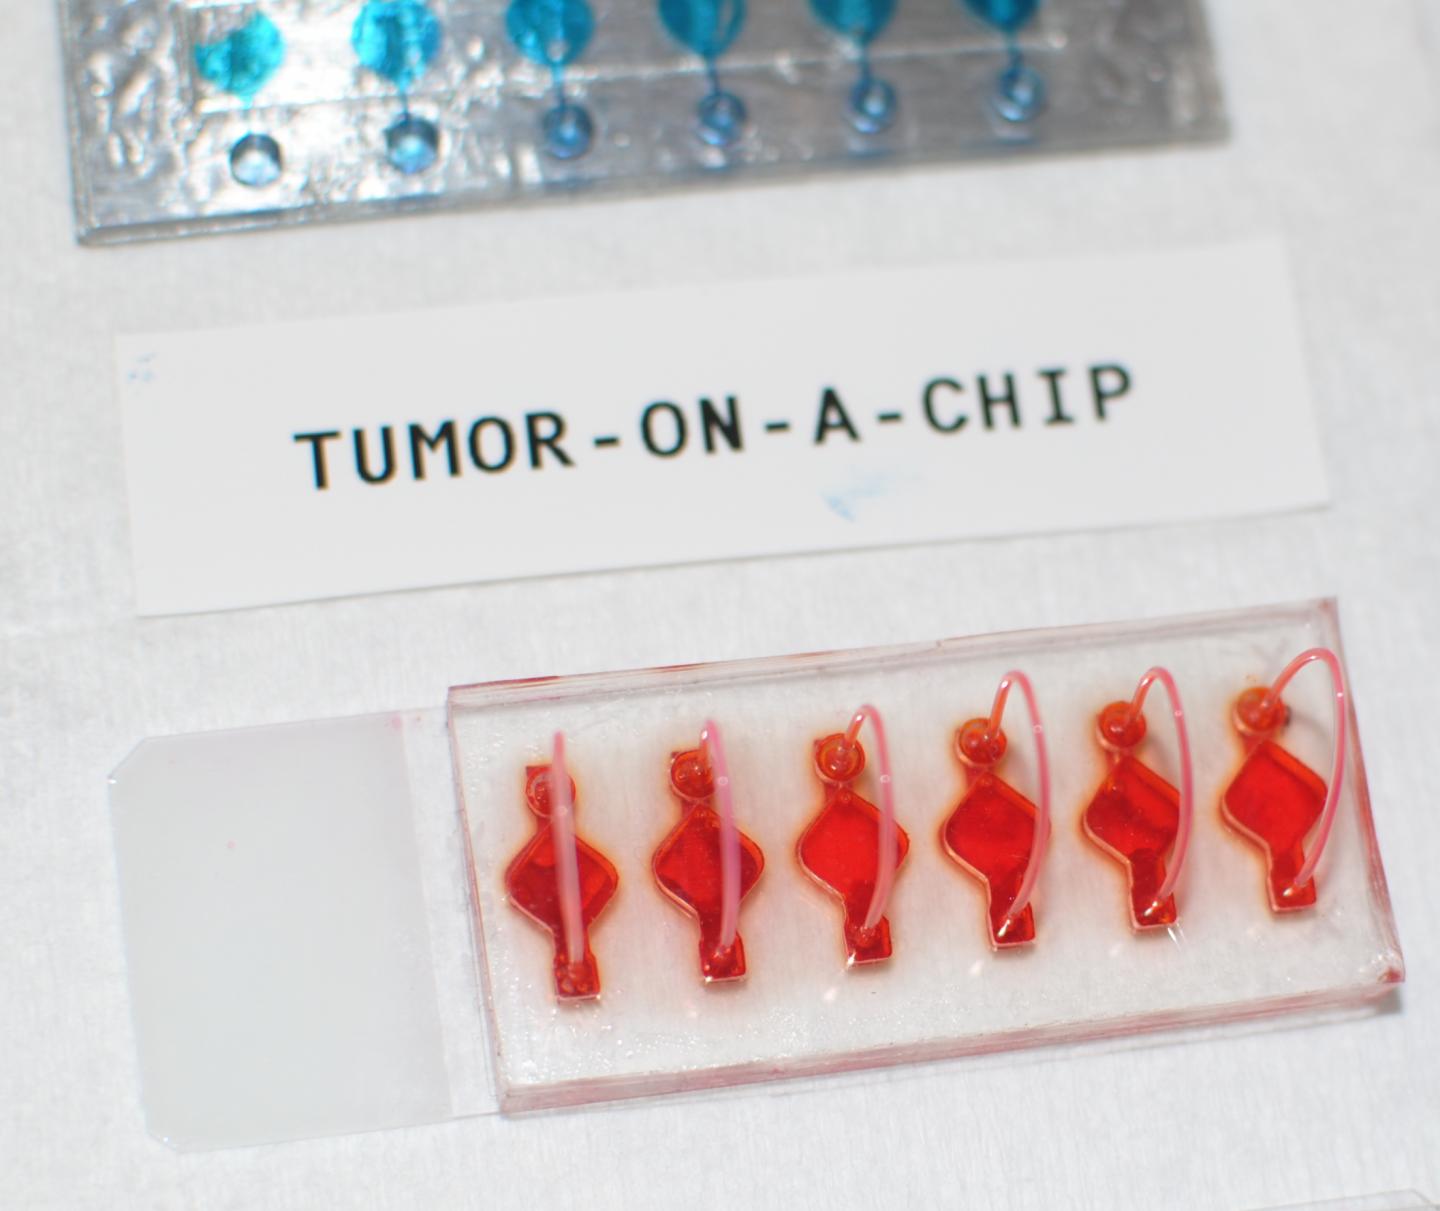 Tumor-on-a-chip